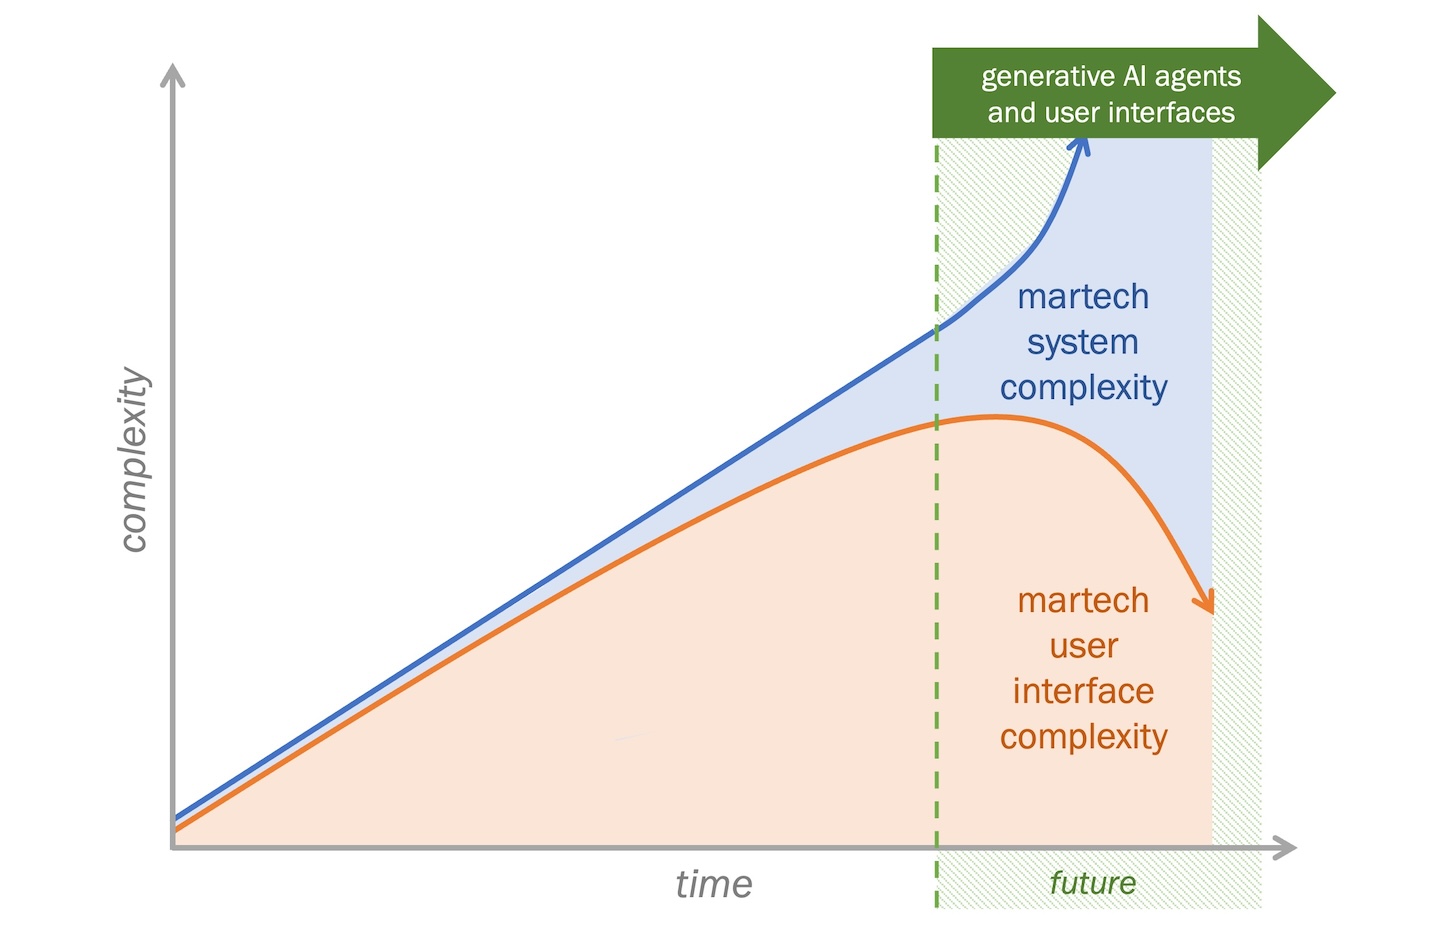 Increasing Martech System Complexity, Decreasing Martech UX Complexity